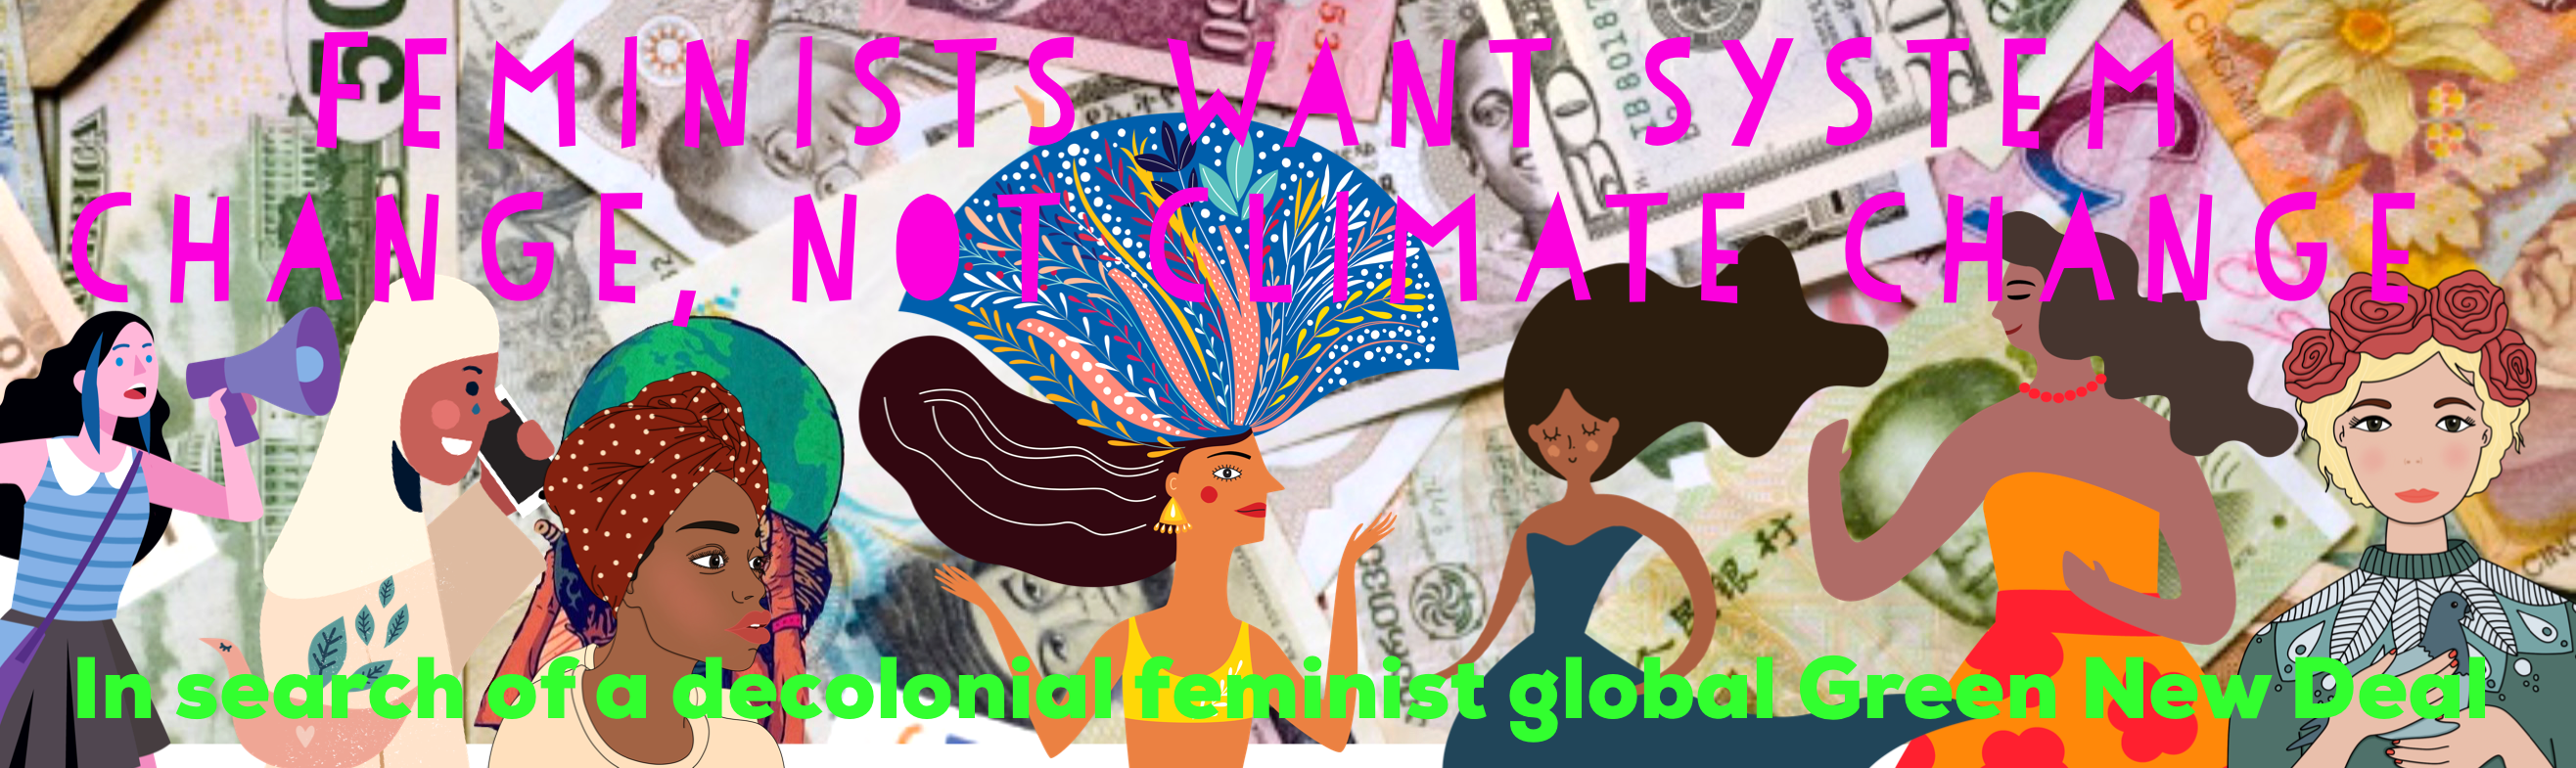 Feminists want system change, not climate change!  In search of a decolonial, feminist global green new deal